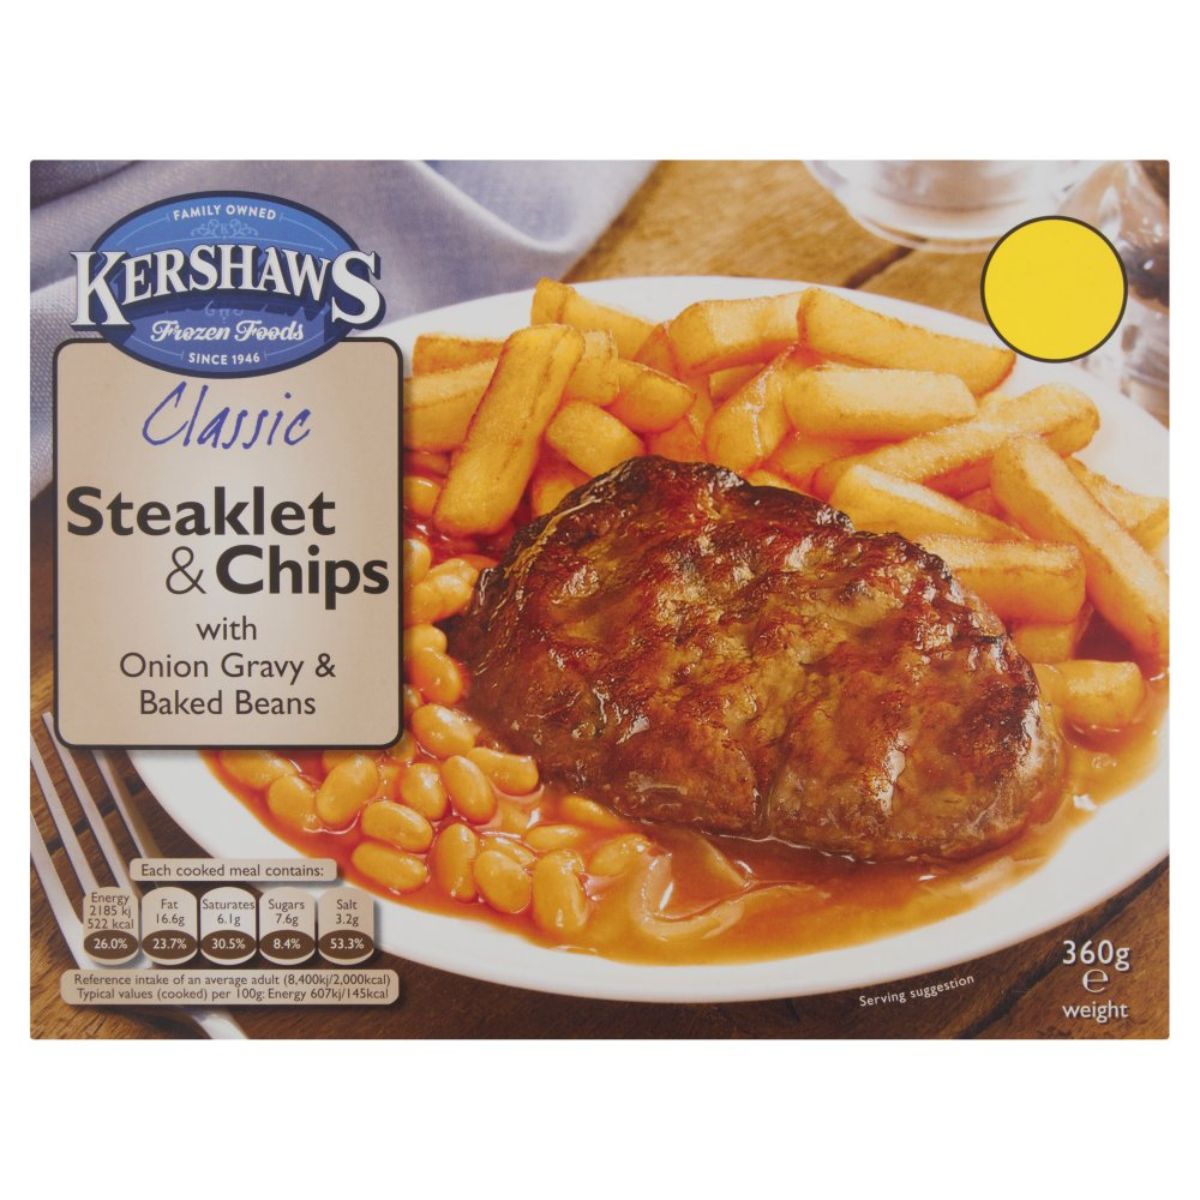 A package of Kershaws - Classic Steaklet & Chips with Onion Gravy & Baked Beans - 360g.